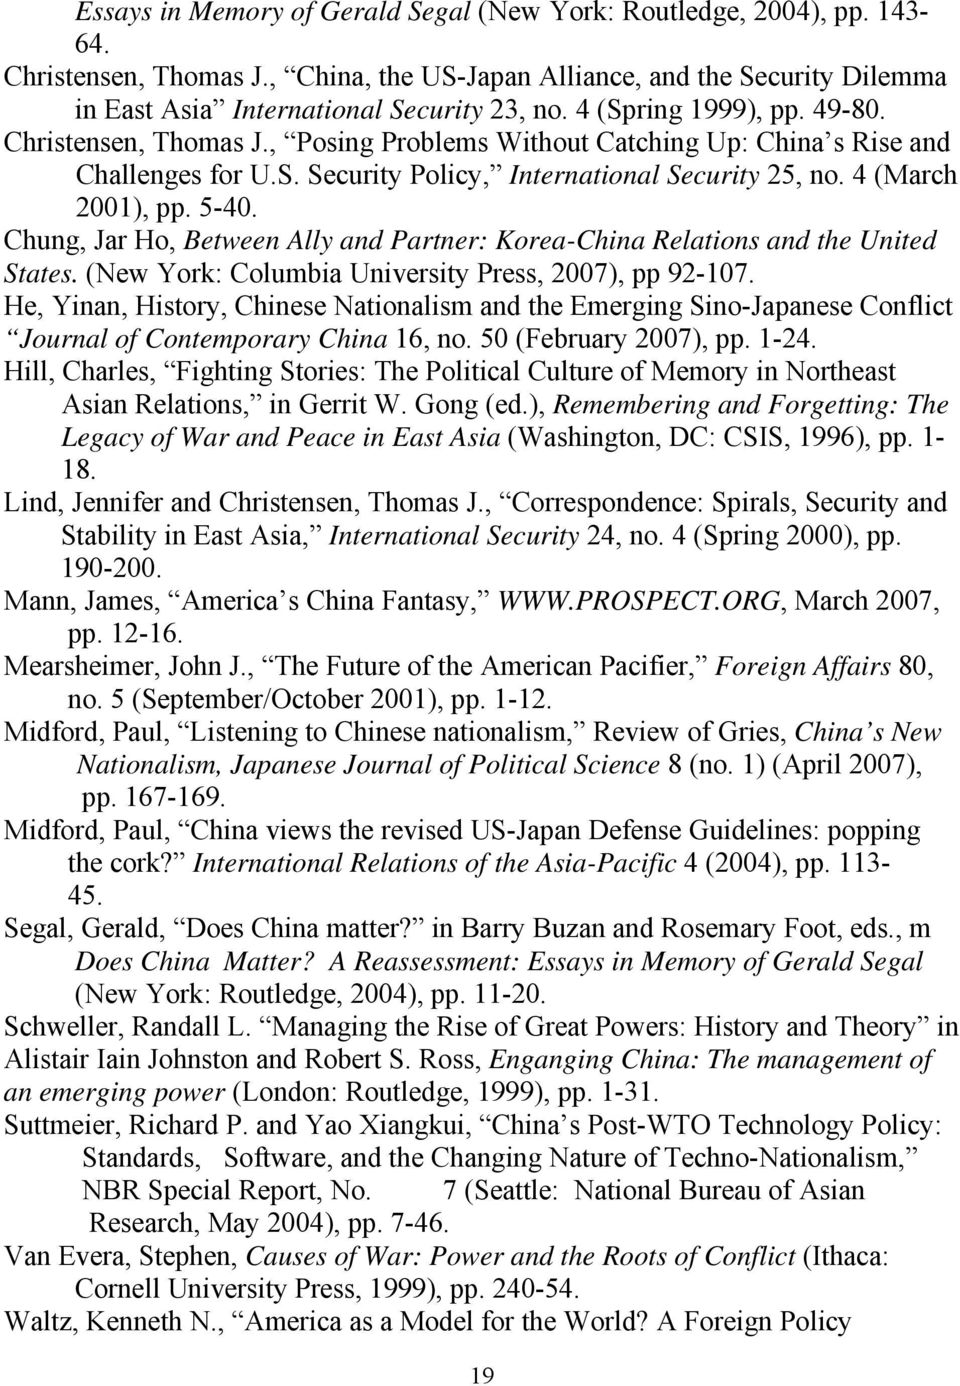 Chung, Jar Ho, Between Ally and Partner: Korea-China Relations and the United States. (New York: Columbia University Press, 2007), pp 92-107.